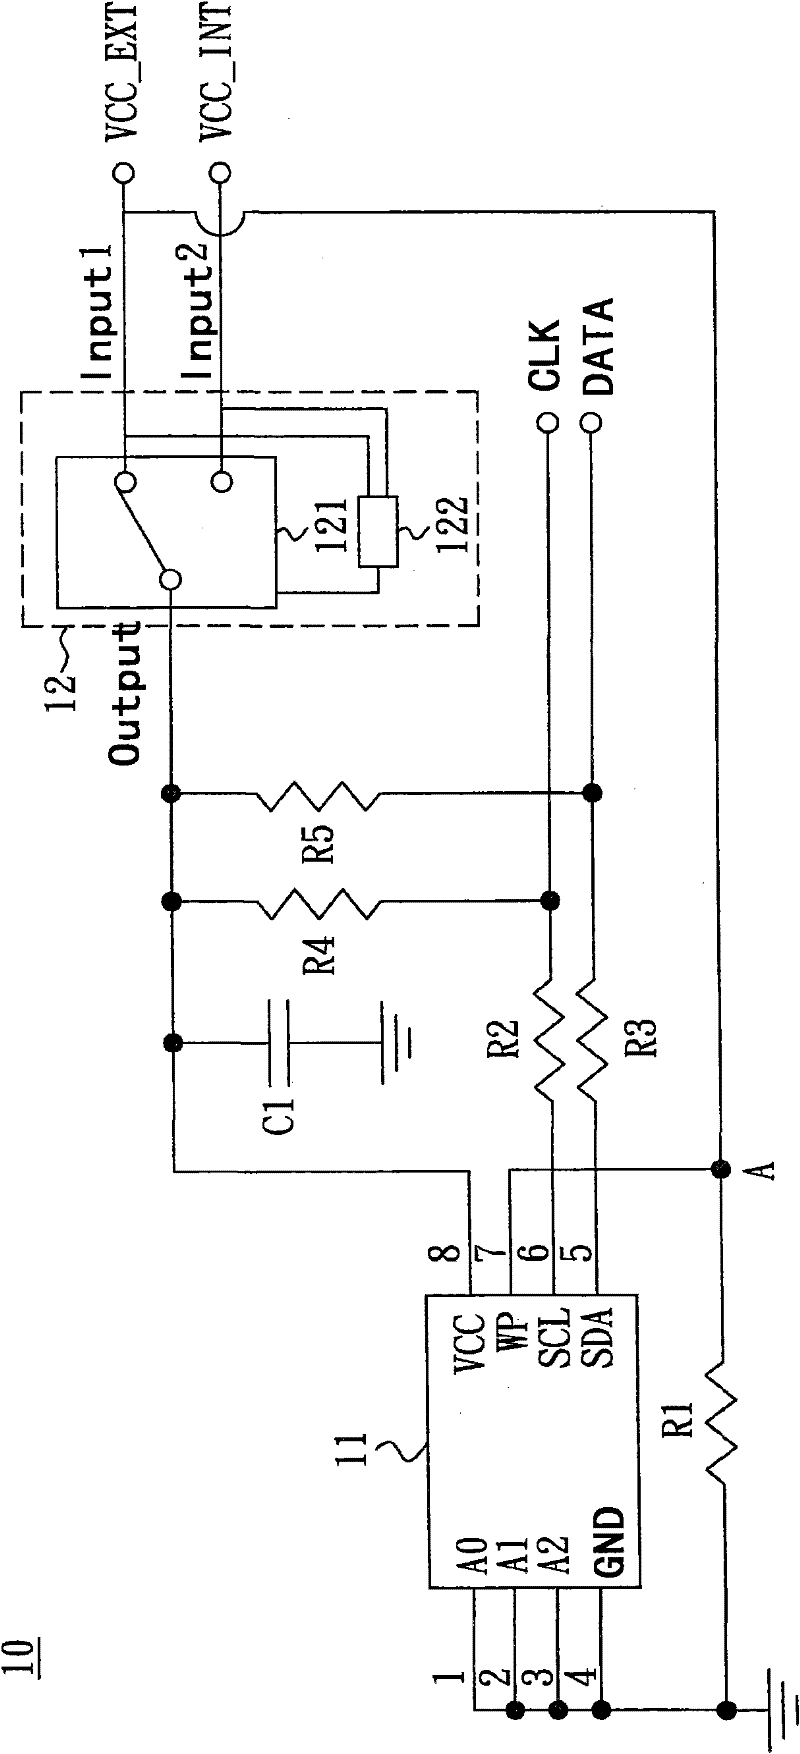 Read-write protection circuit